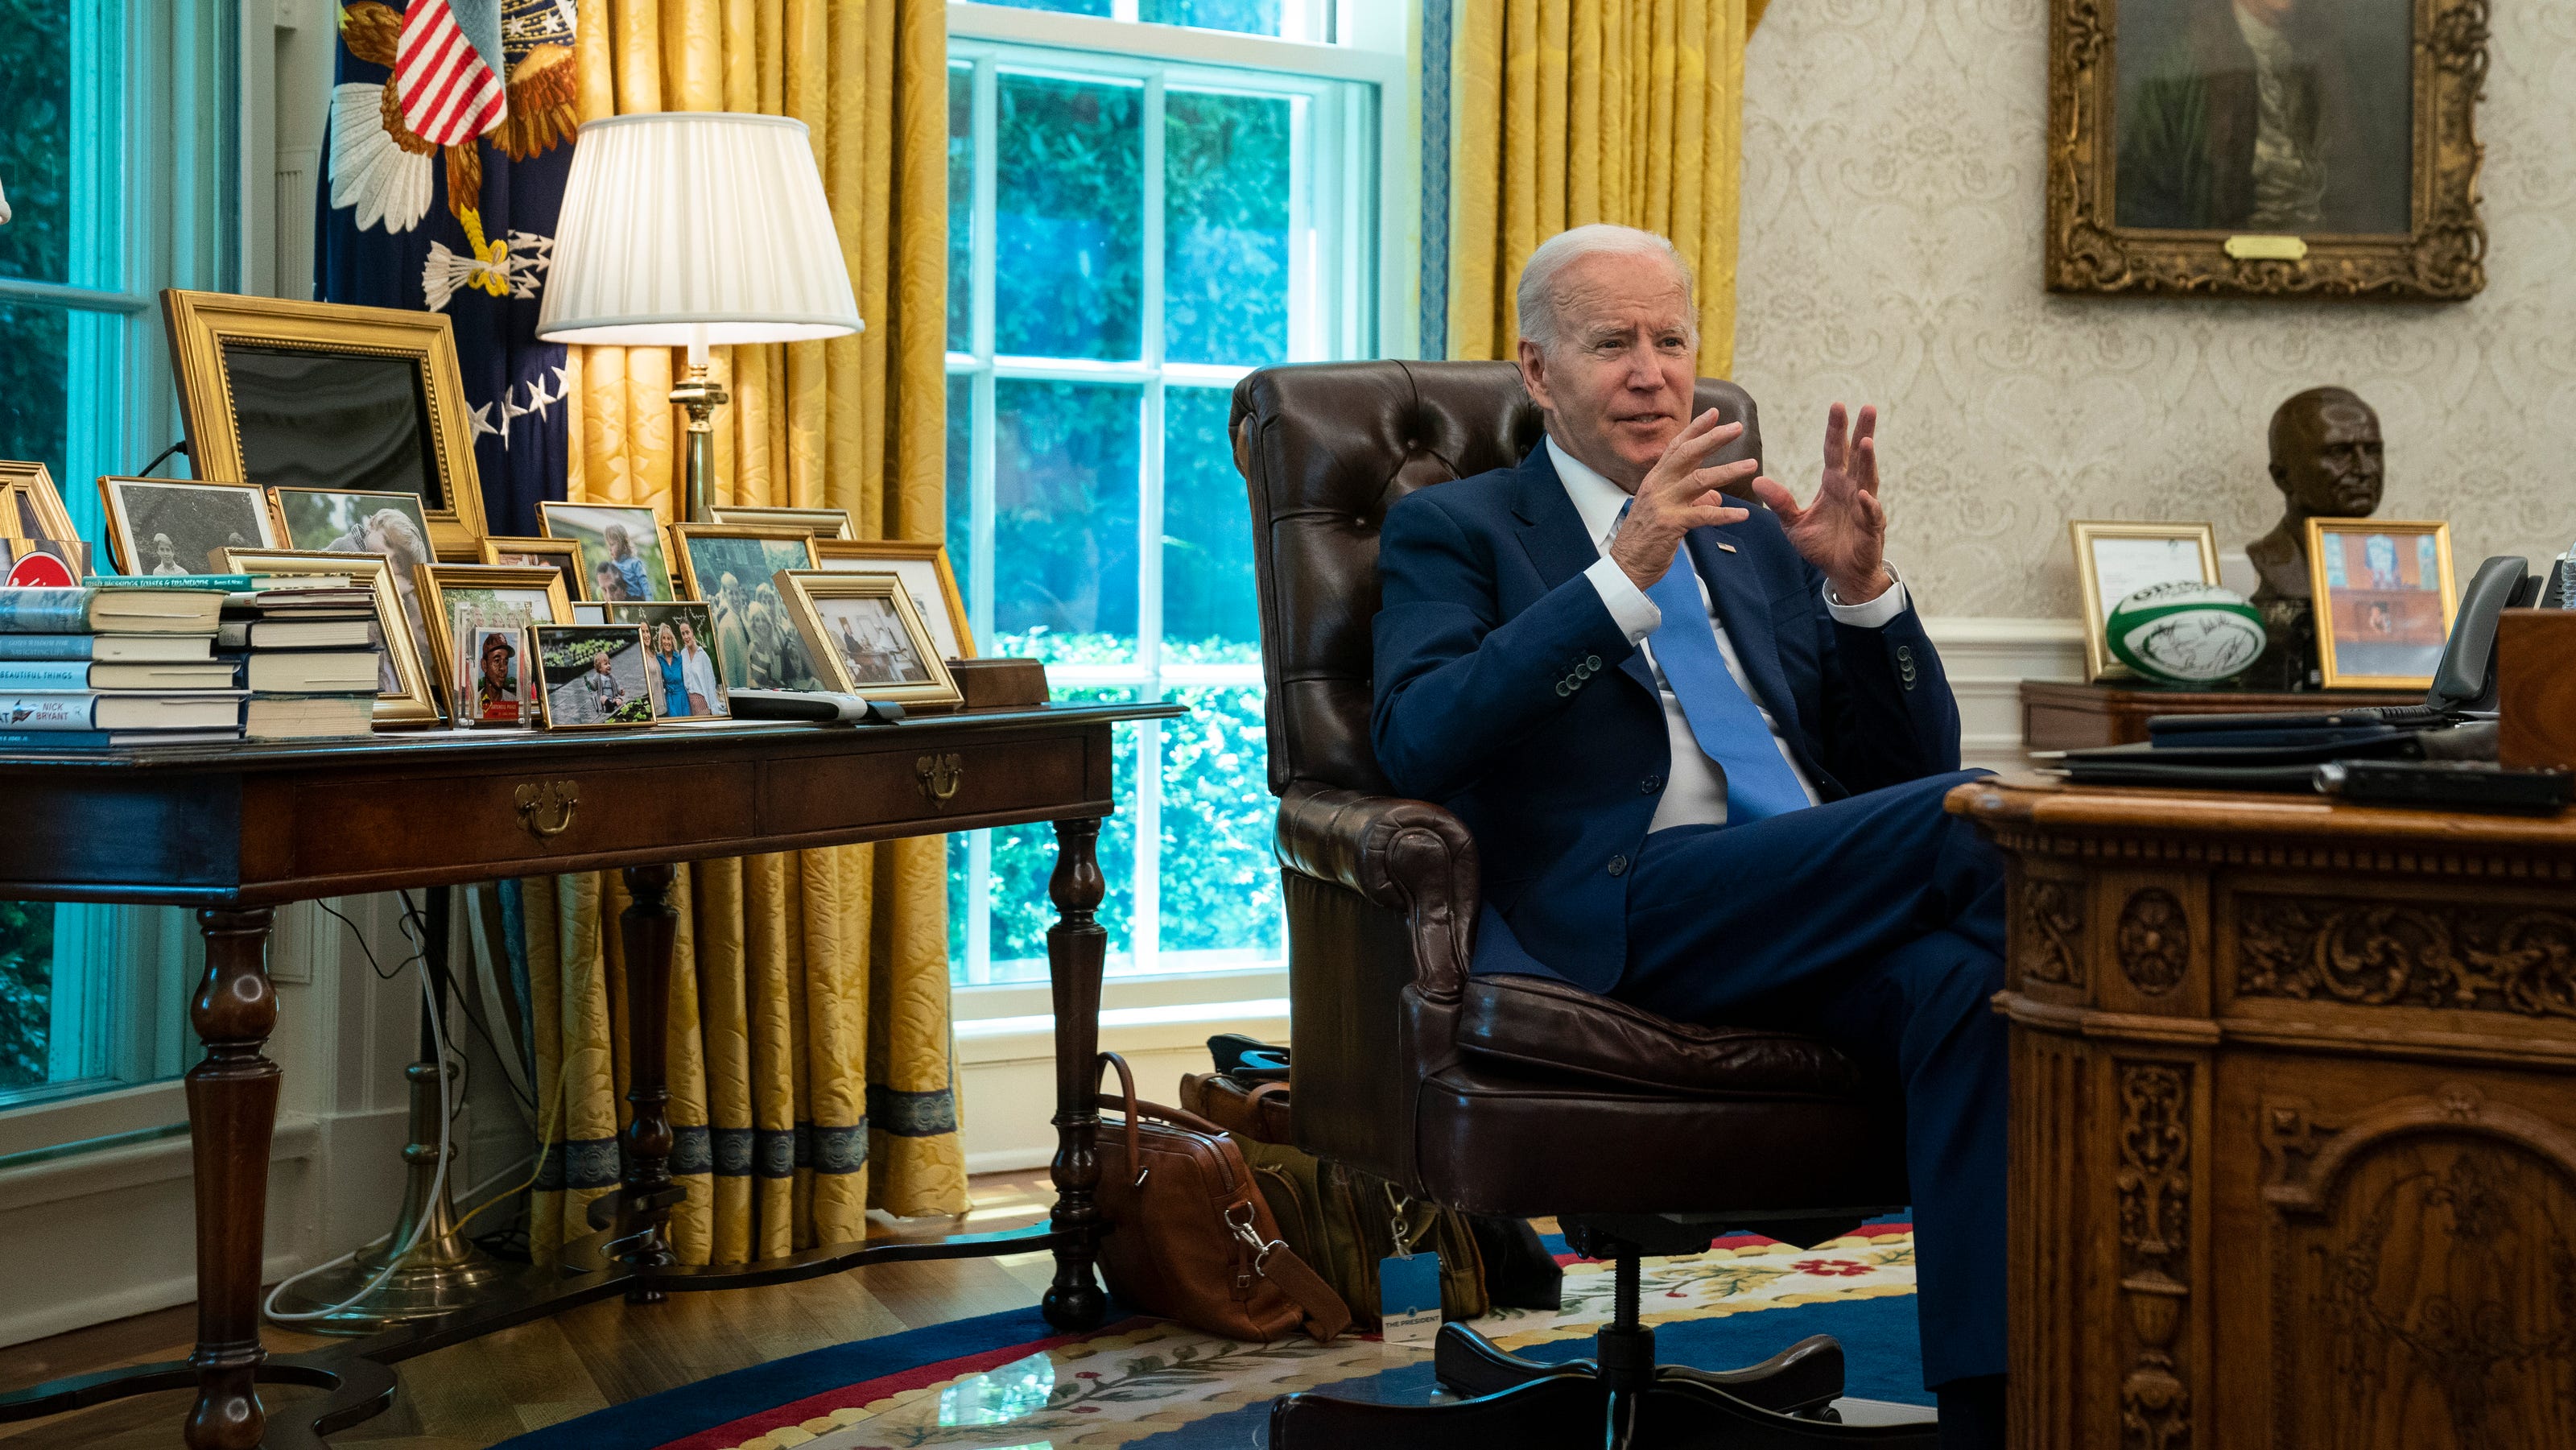 Fact check: Joe Biden was photographed often in the Oval Office